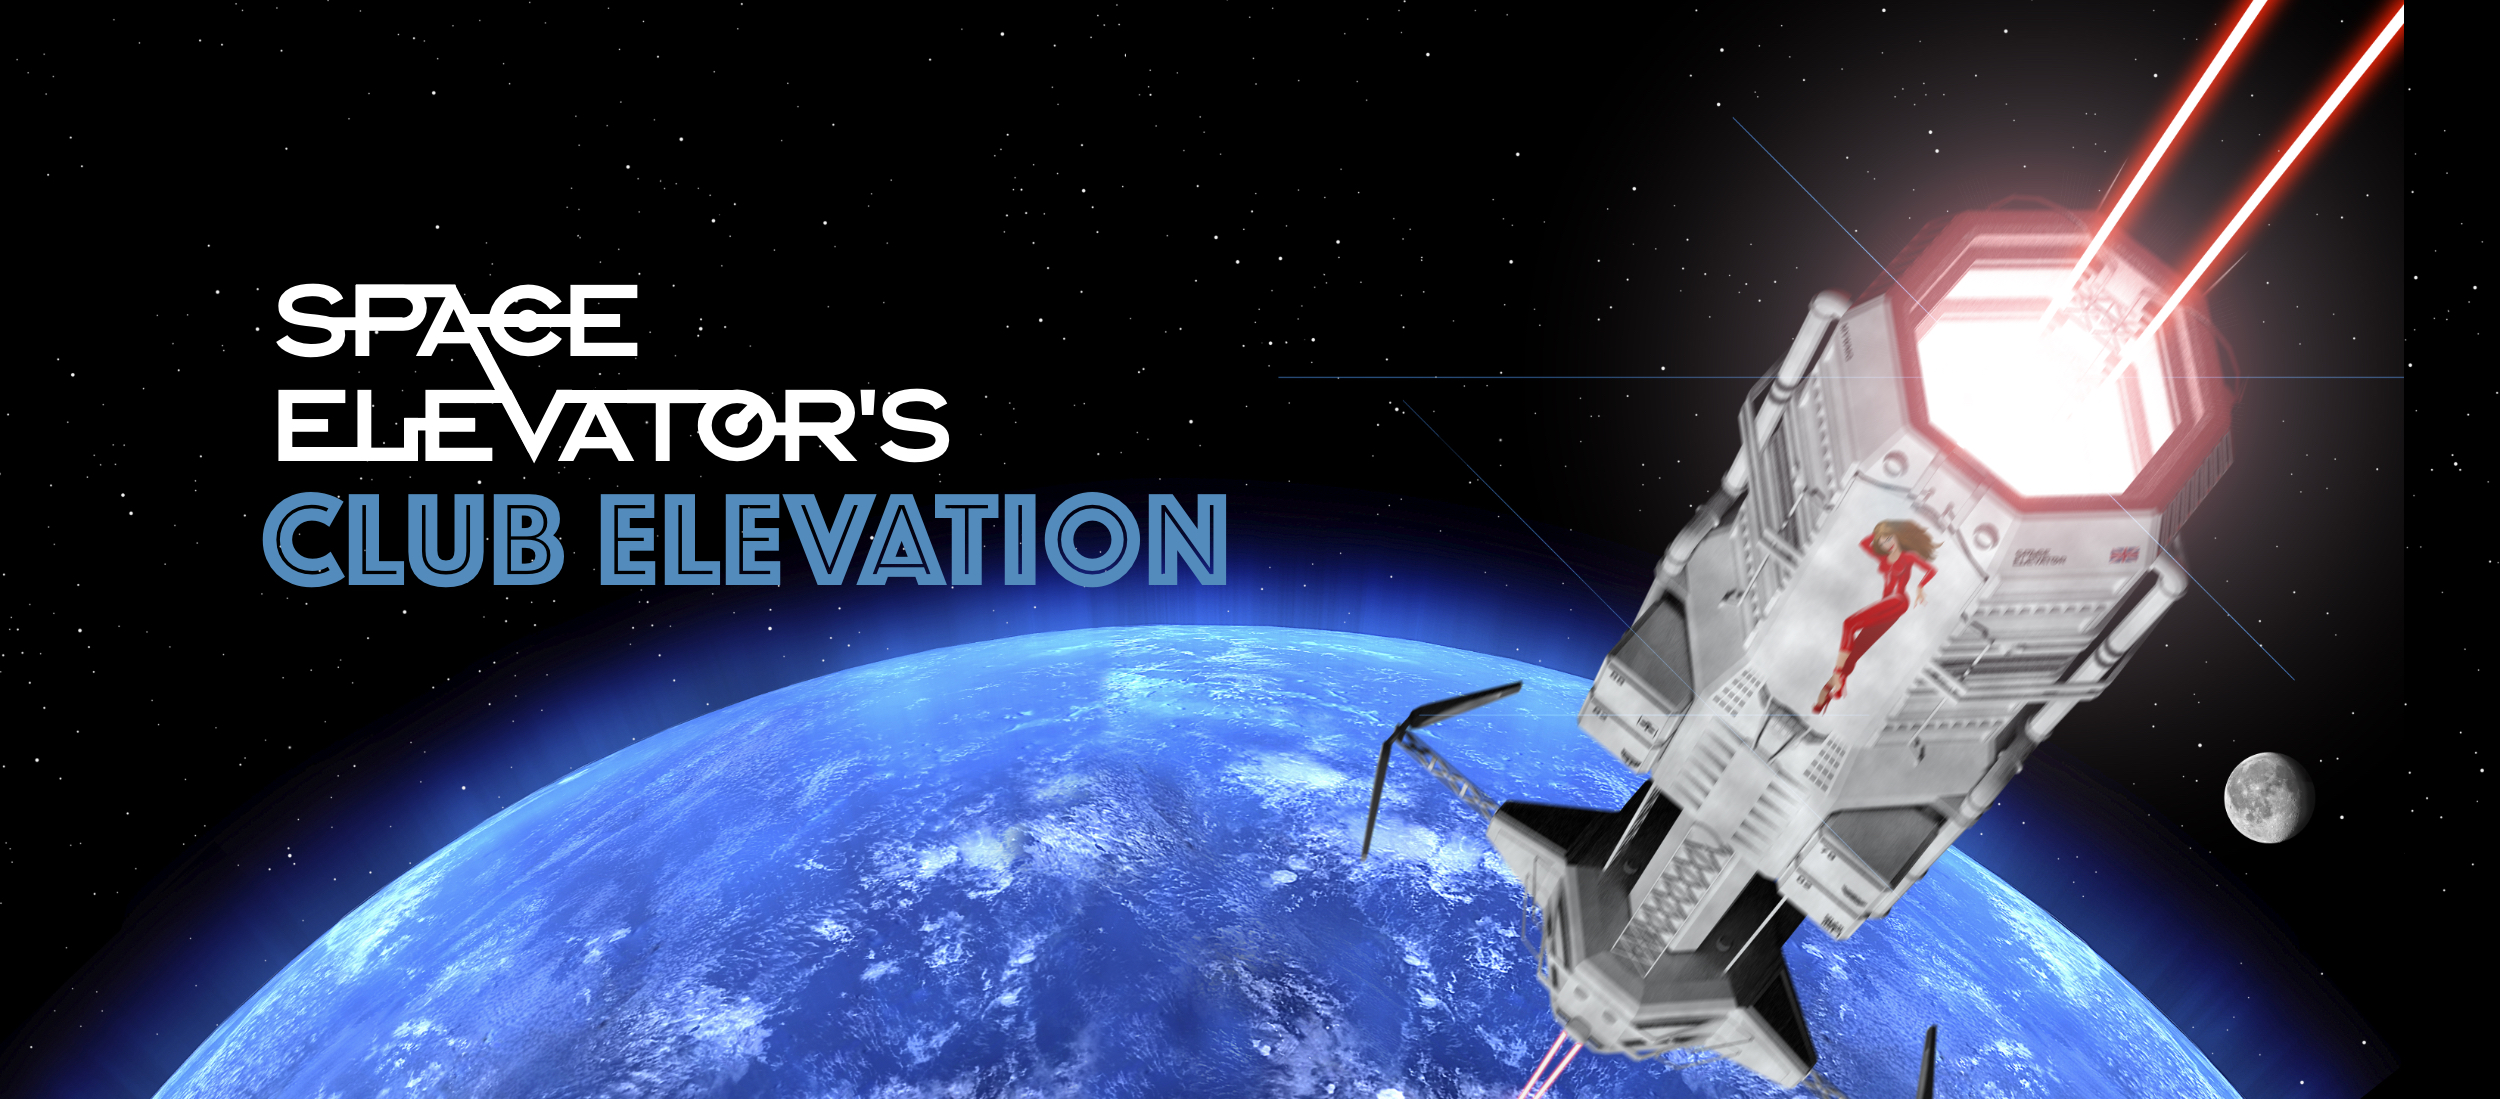 Club Elevation - behind the scenes with Space Elevator